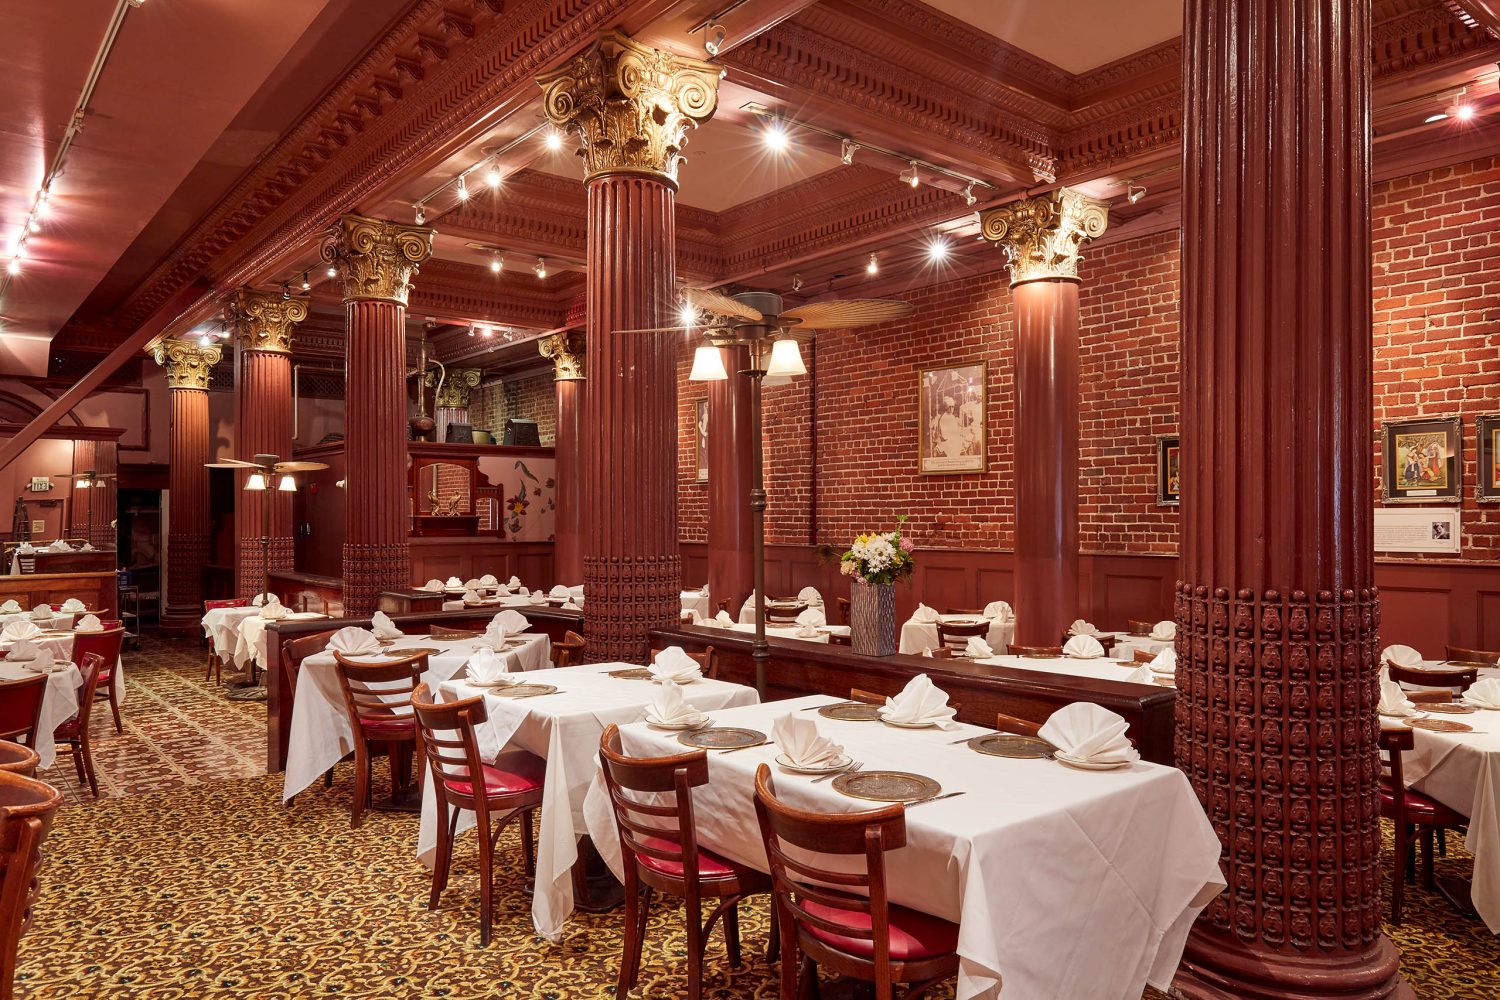 inside of restaurant, columns, tables with tablecloths, chairs 